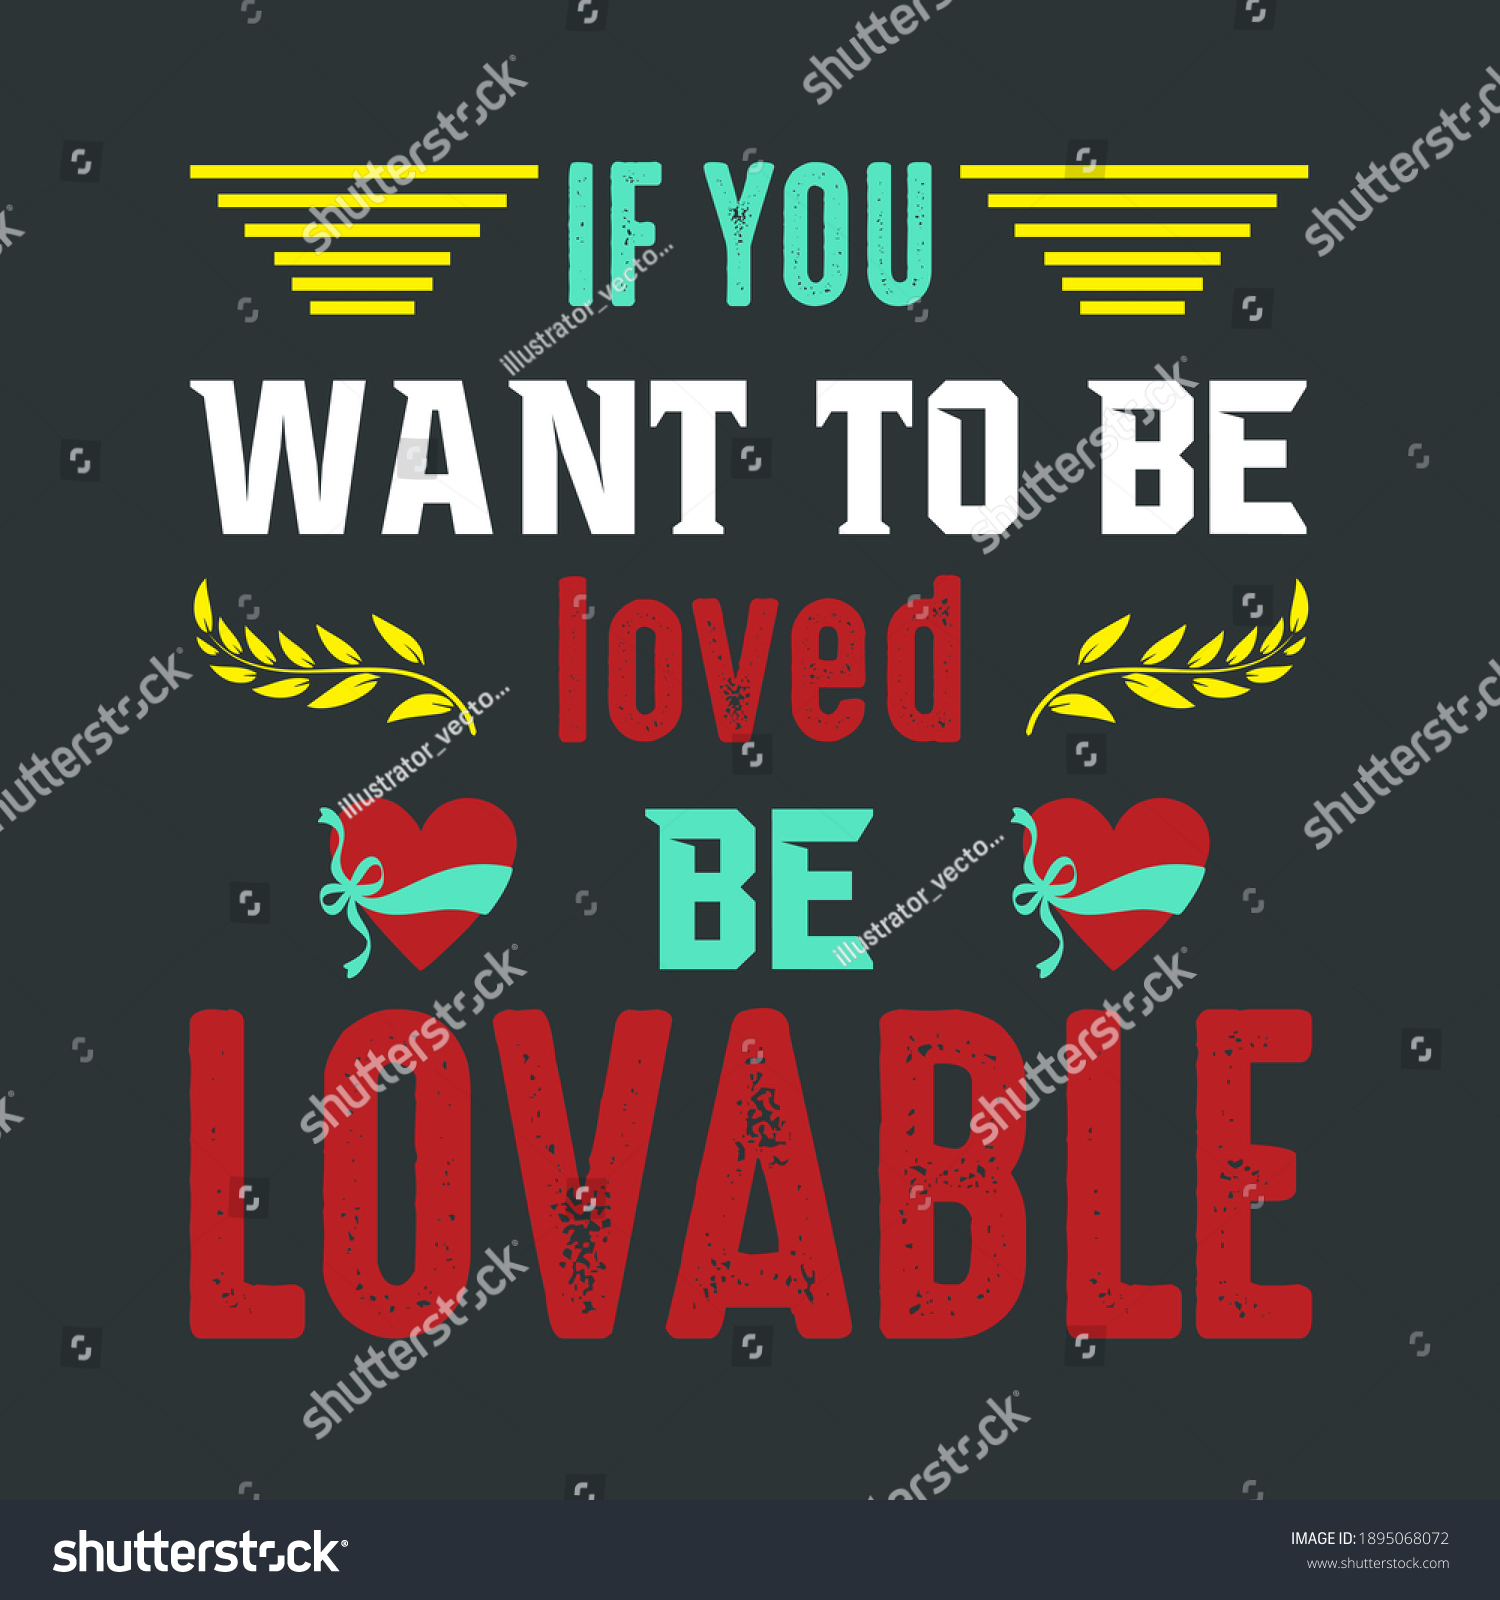 You be to loved lovable be want if How Do